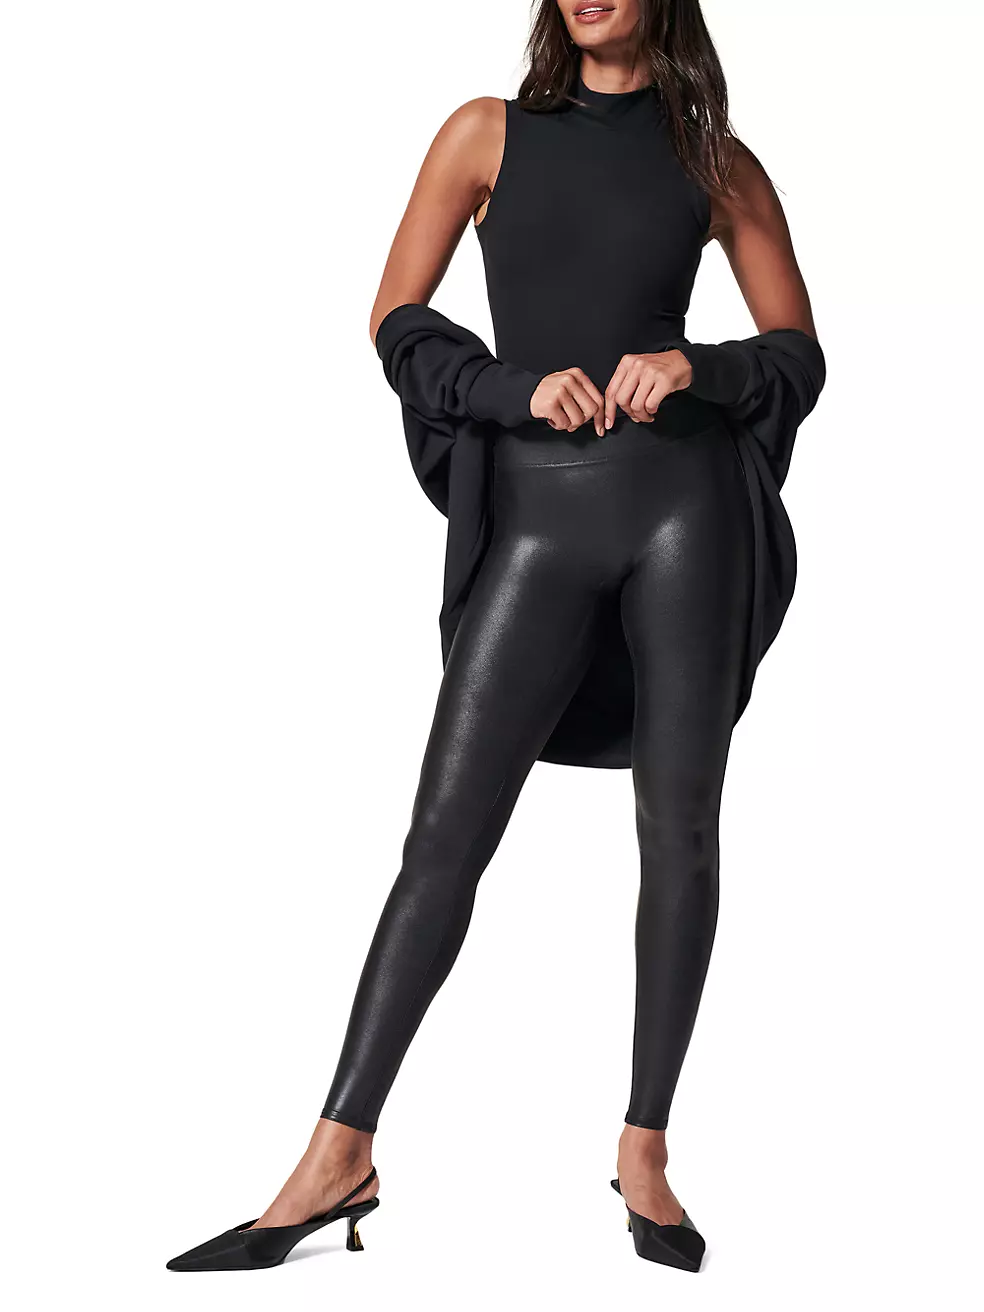 Spanx's New Fleece-Lined Leather Leggings Will Become Your New